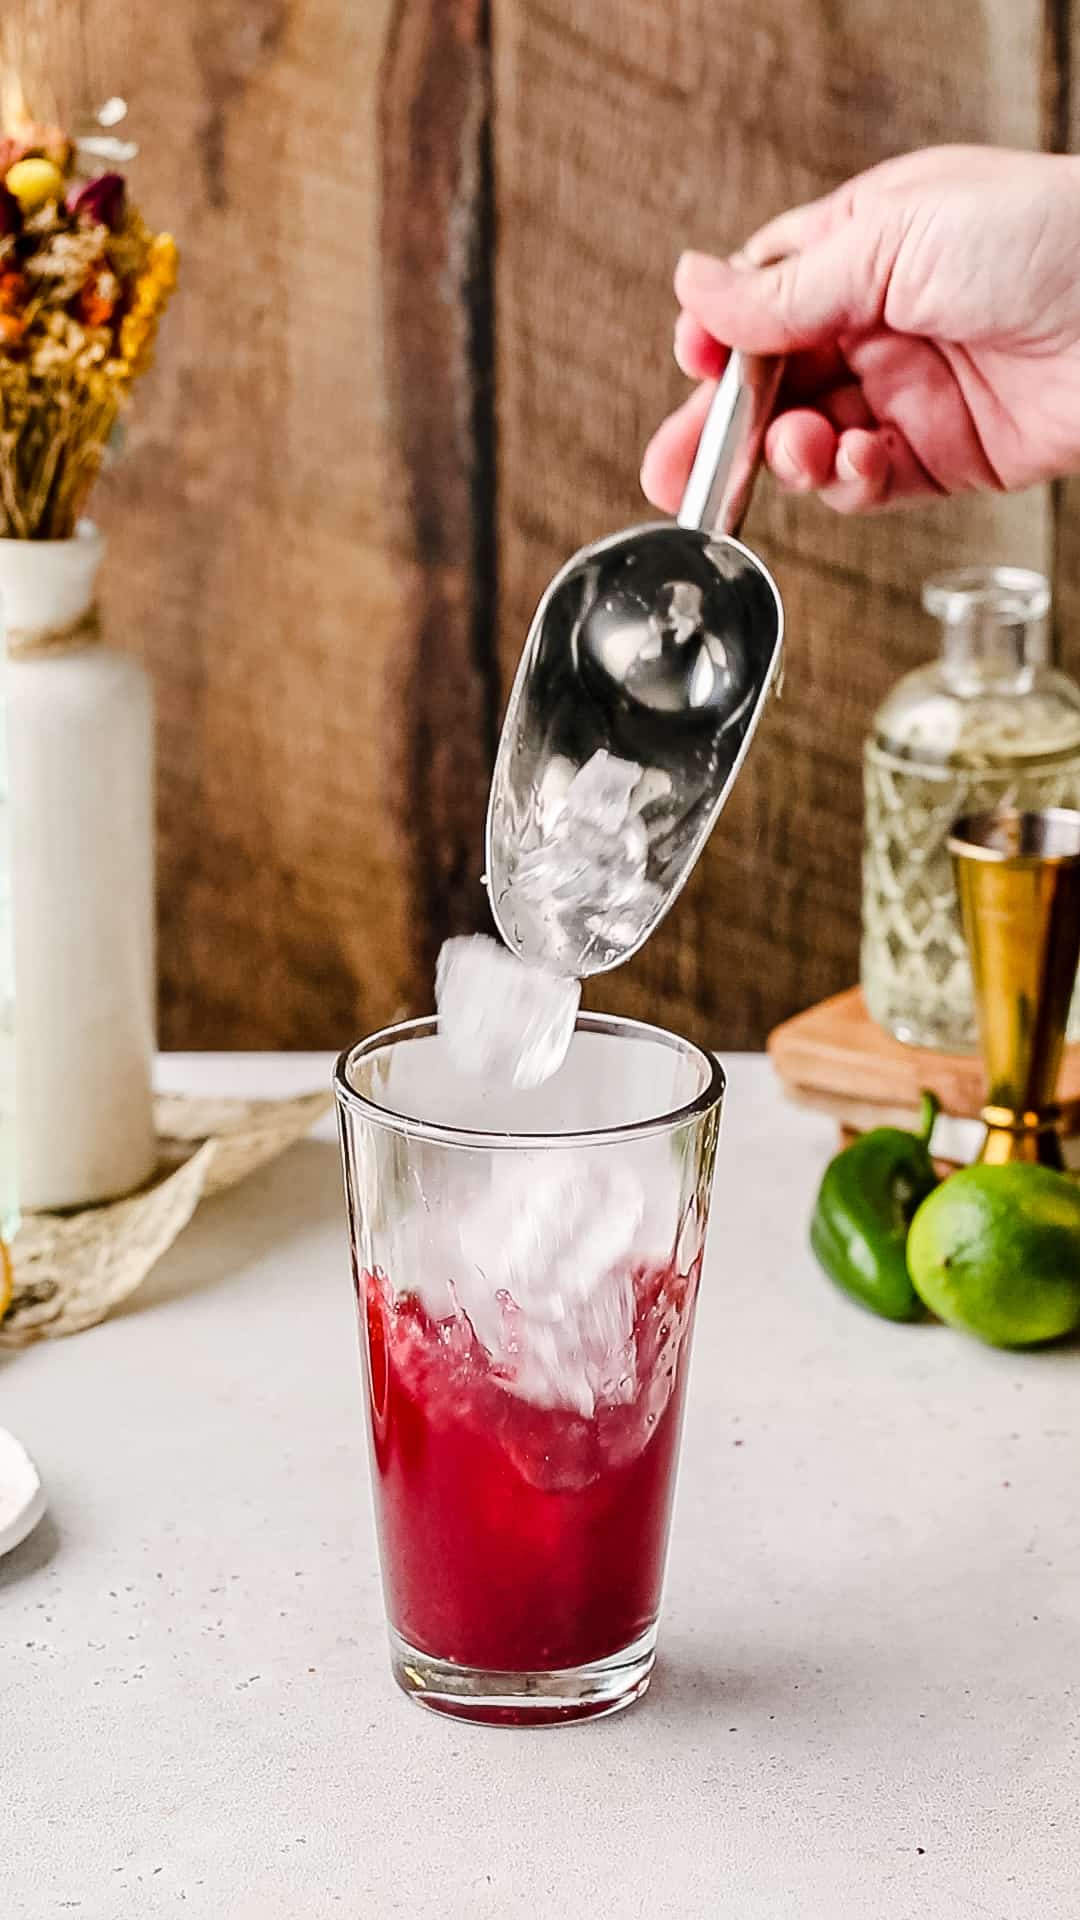 Filling a cocktail shaker with ice using an ice scoop.